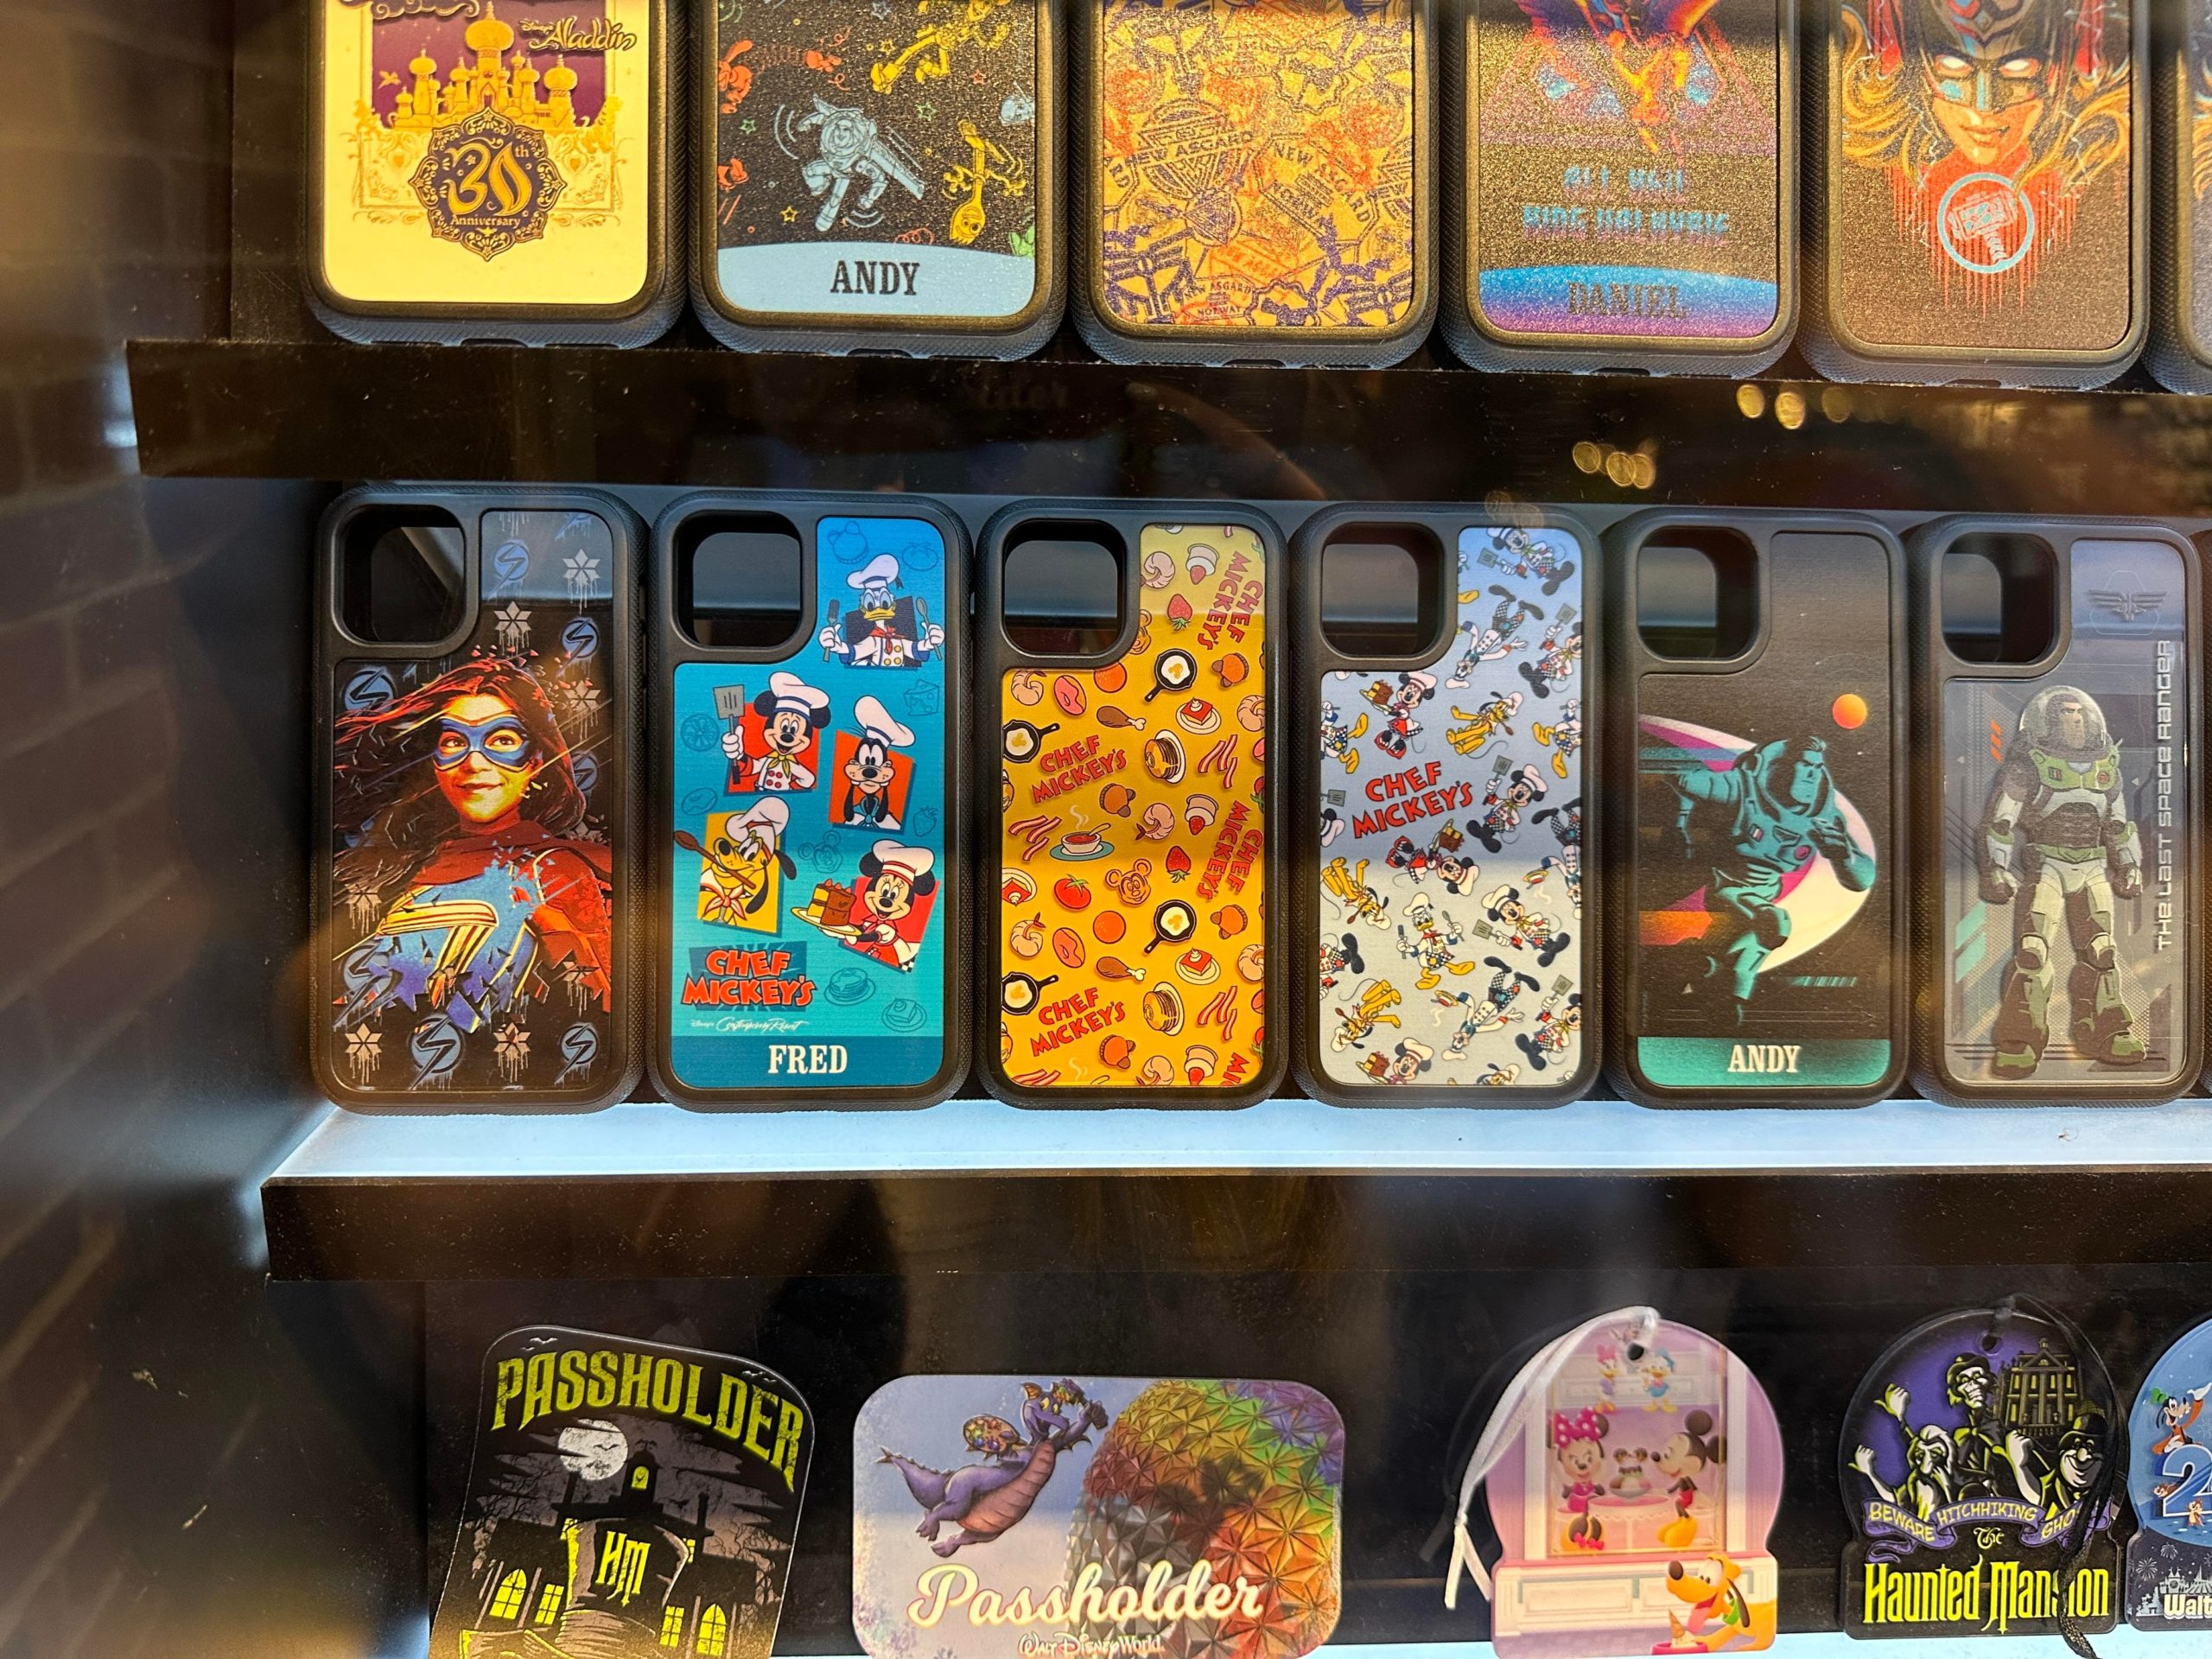 U-Design Apple Watch Bands and Phone Cases Now Available Pre-Made at  Universal Orlando Resort - WDW News Today